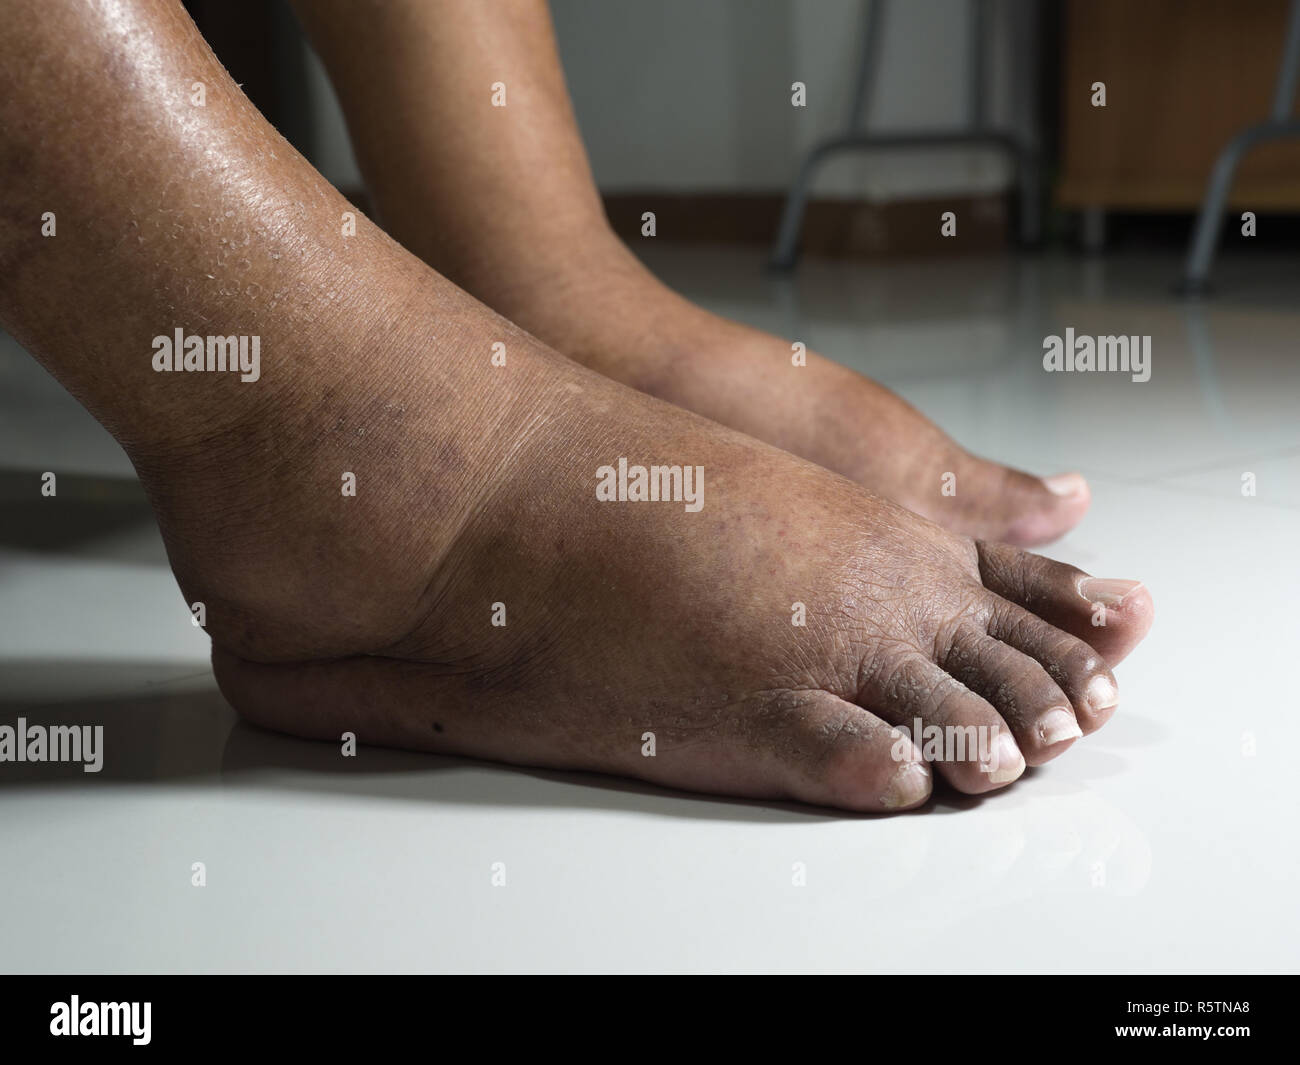 The Feet Of People With Diabetes Dull And Swollen Due To The Toxicity